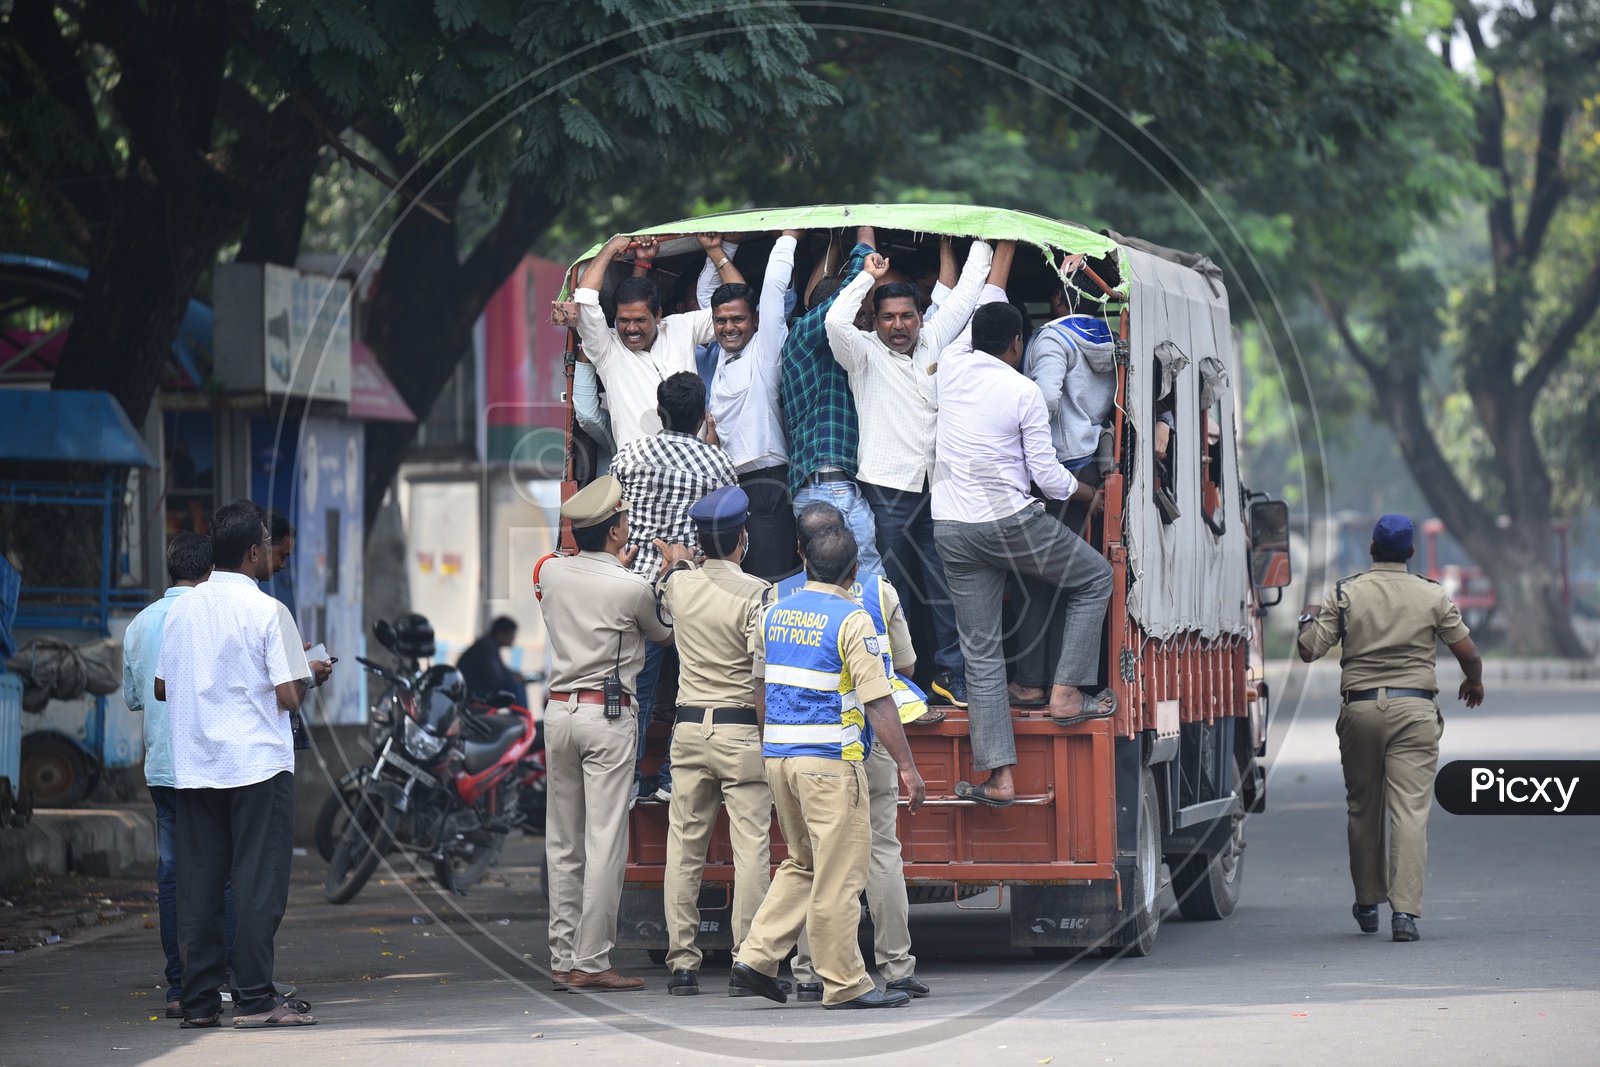 TSRTC JAC Protesters Being Arrested By Hyderabad Police During Million March At Tank Bund  in Hyderabad